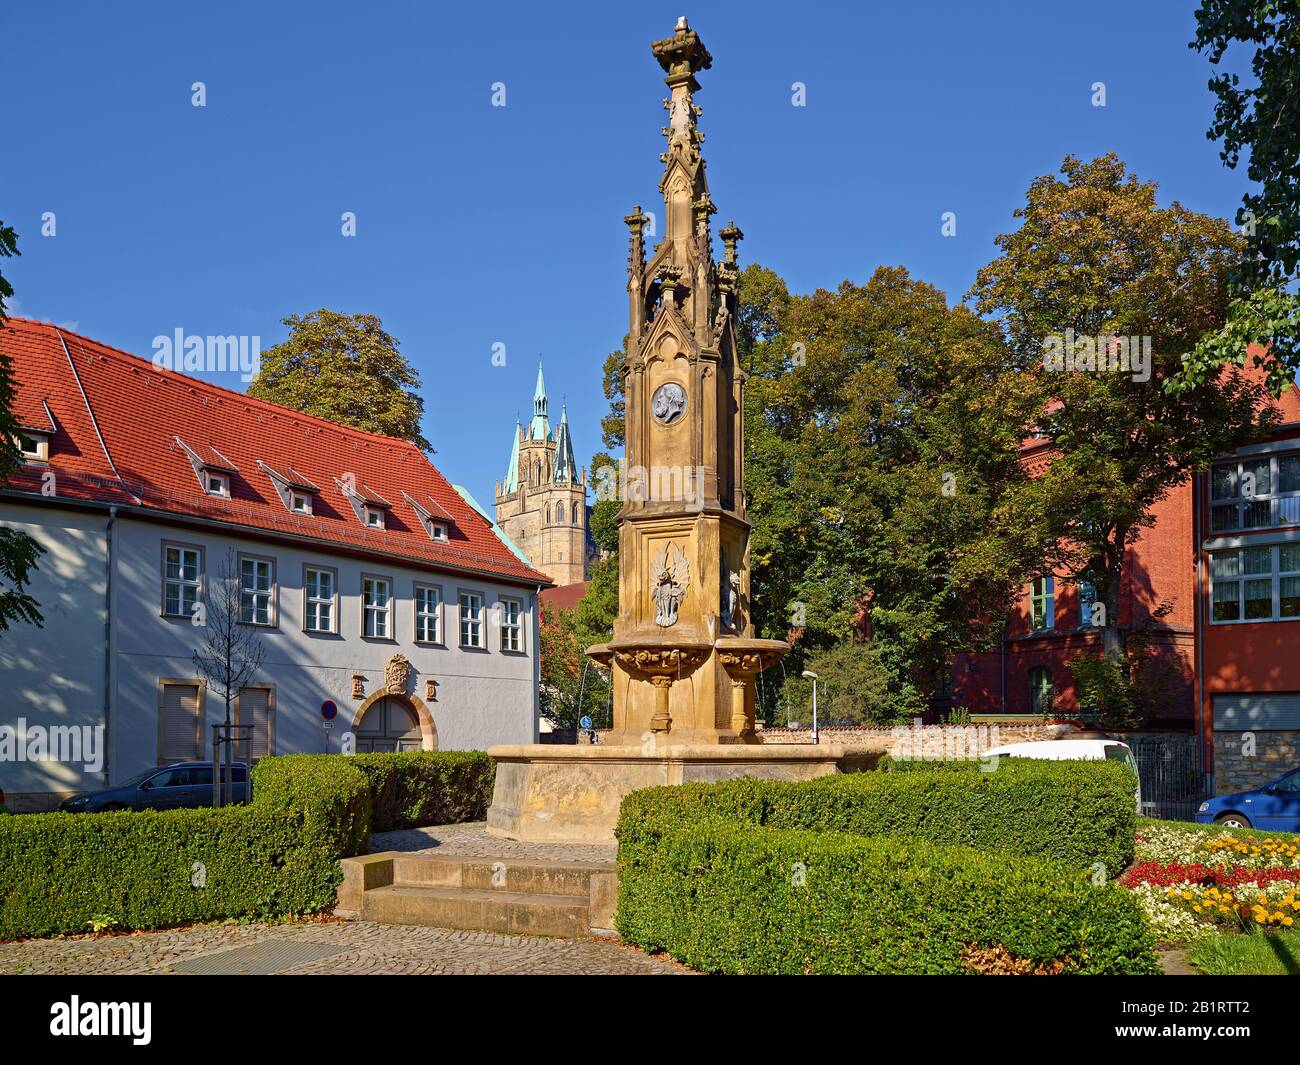 Hermannsplatz with Dompropstei, cathedral and fountain in Erfurt, Thuringia, Germany Stock Photo